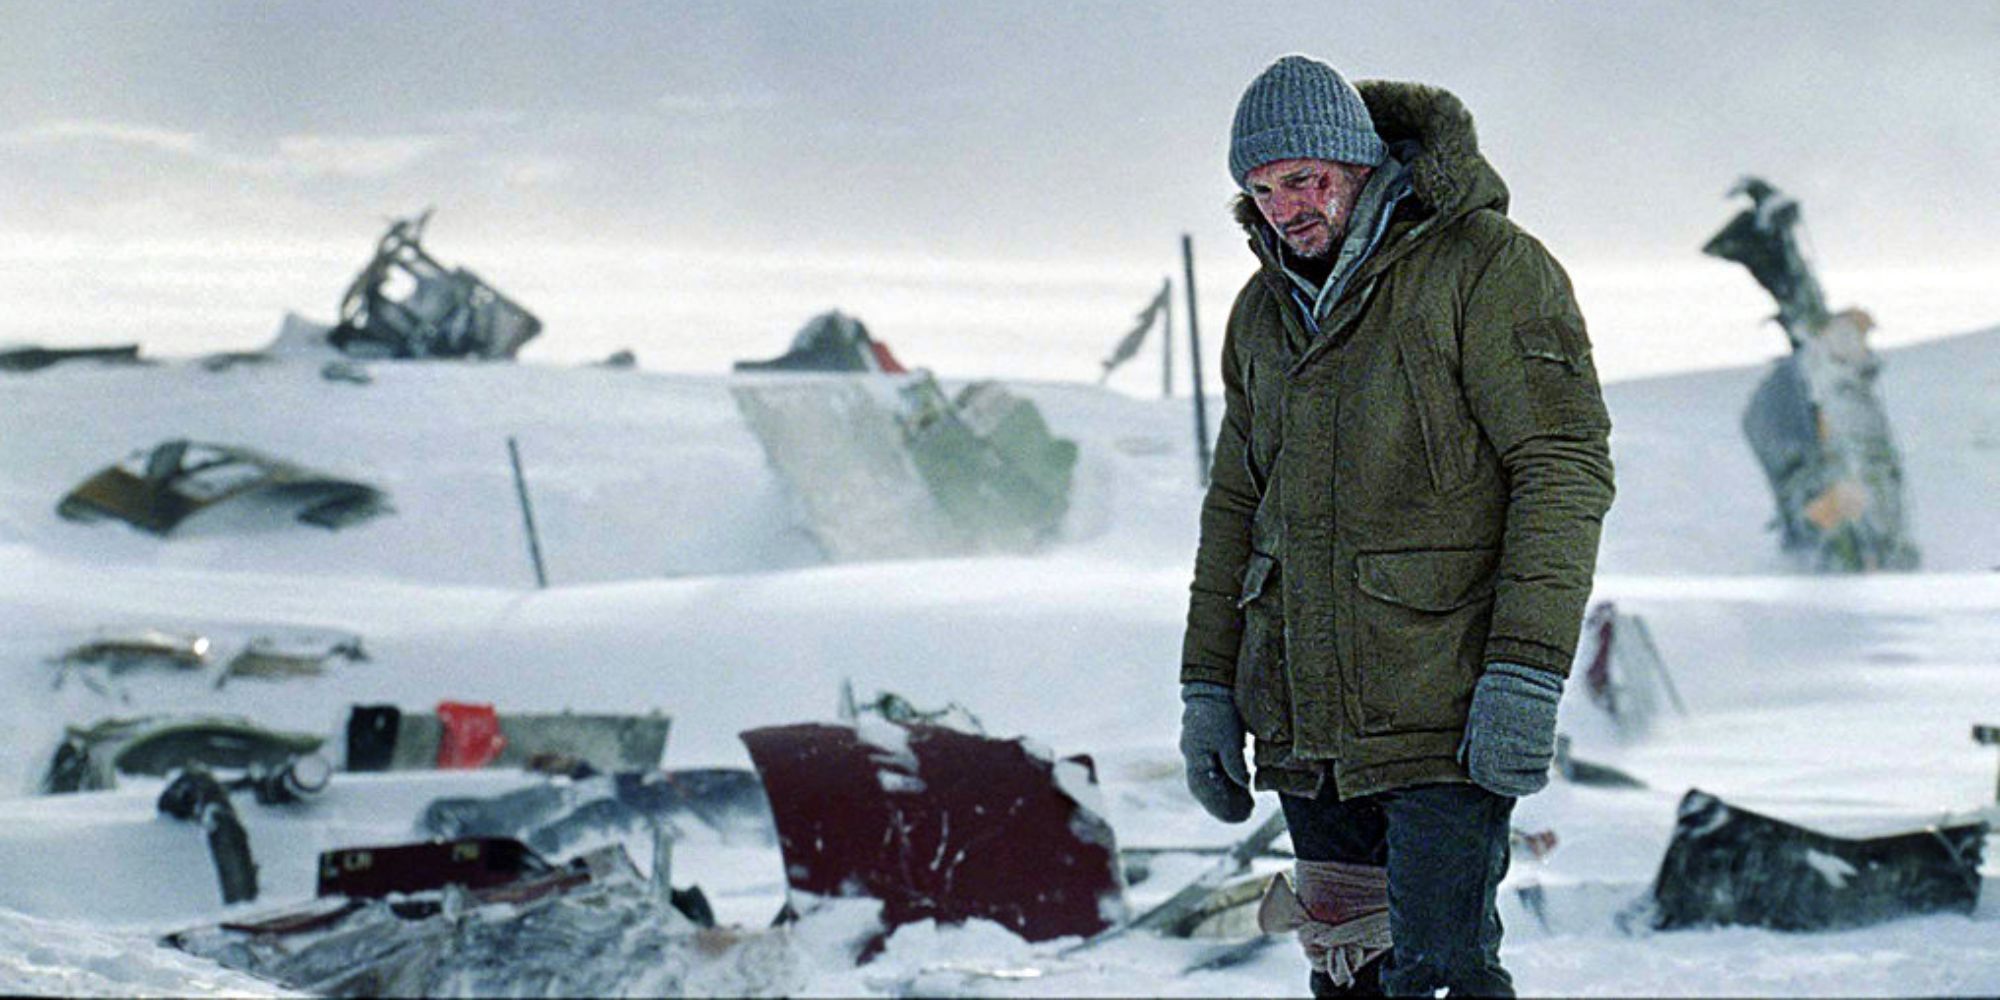 A man standing in the aftermath of a plane crash in the snow